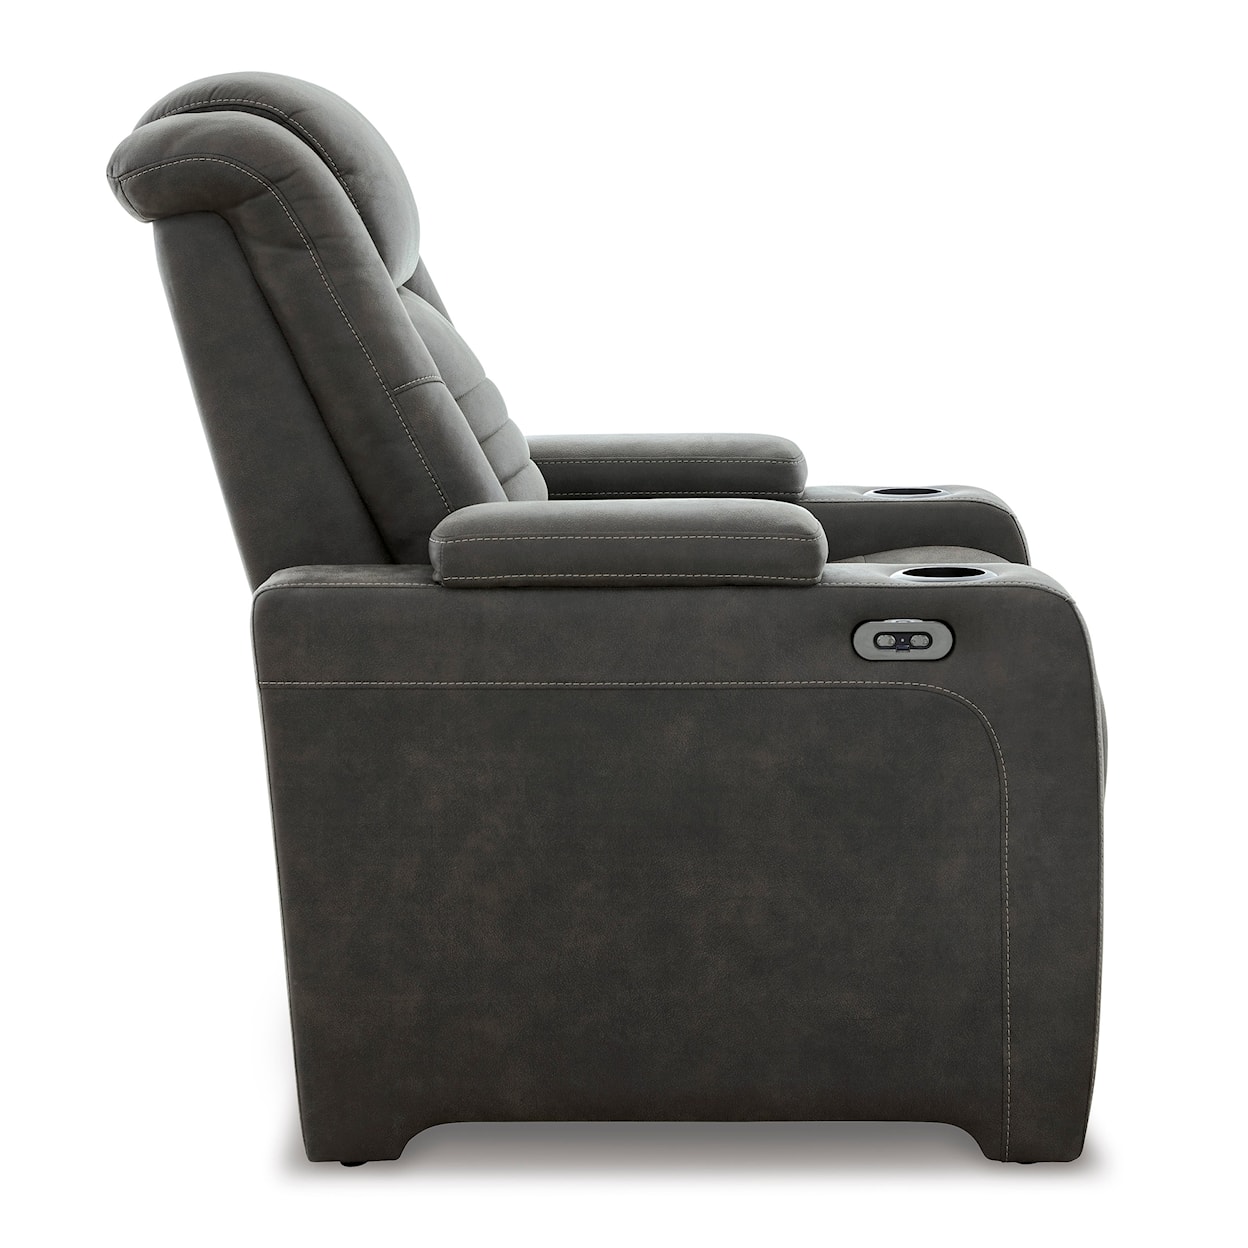 Signature Design by Ashley Furniture Soundcheck Power Recliner